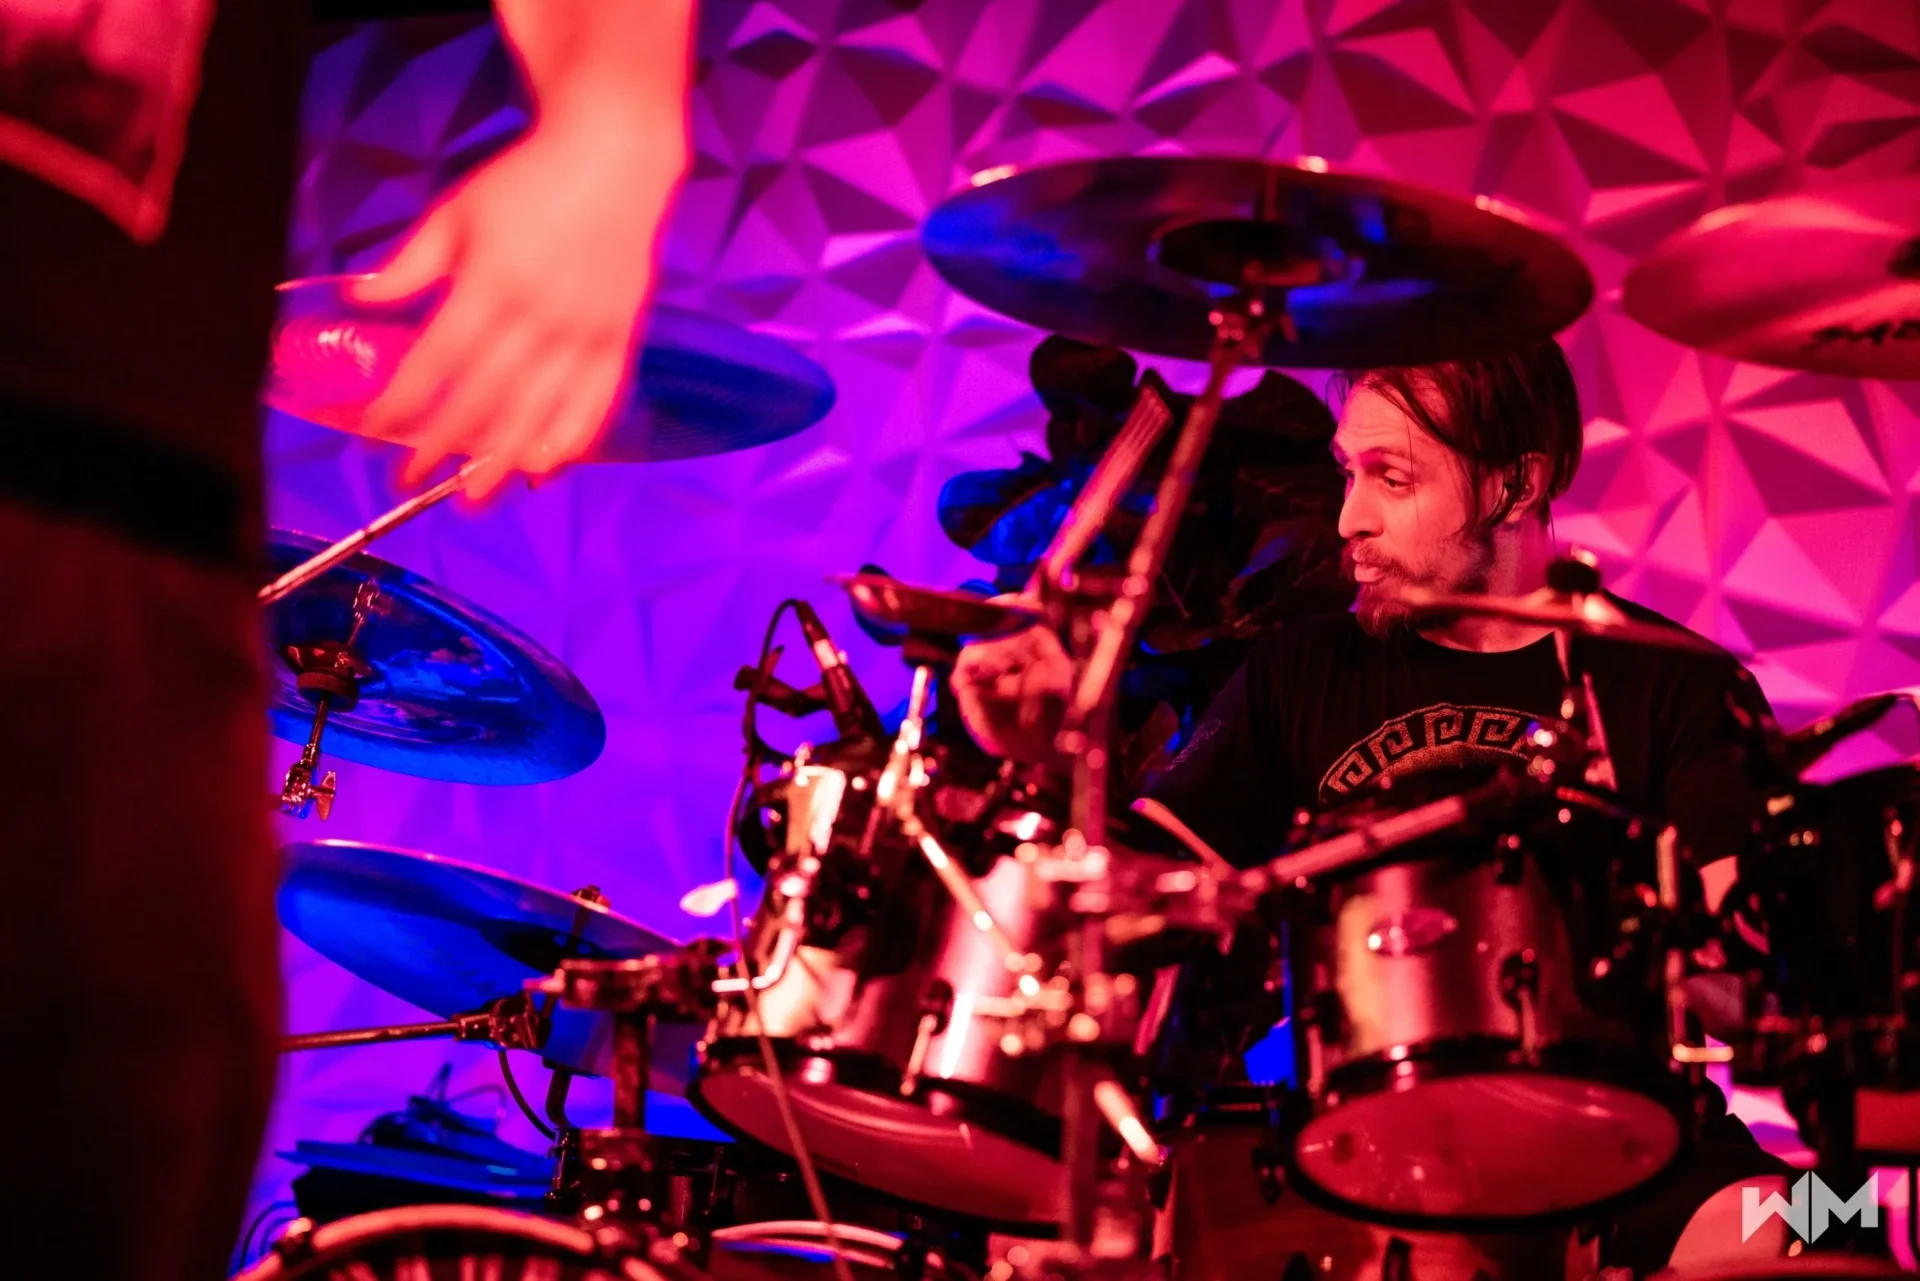 A man playing drums in front of purple lights.